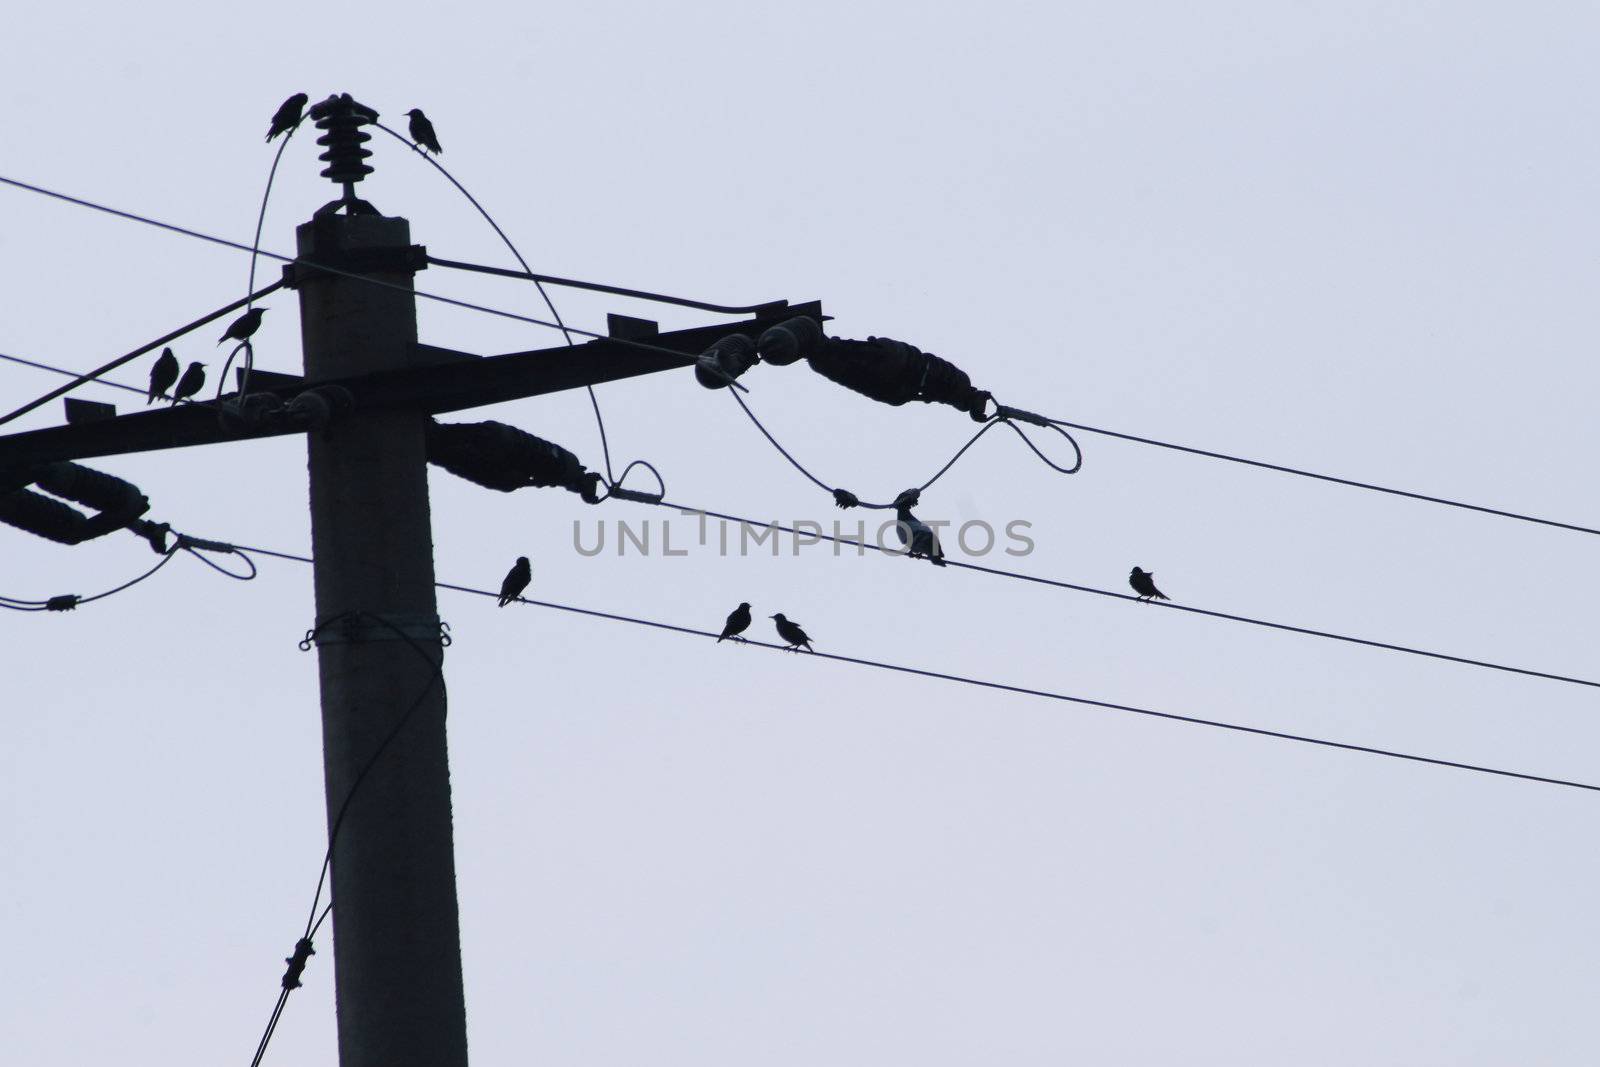 Birds on electrical wires against blue cloudless sky